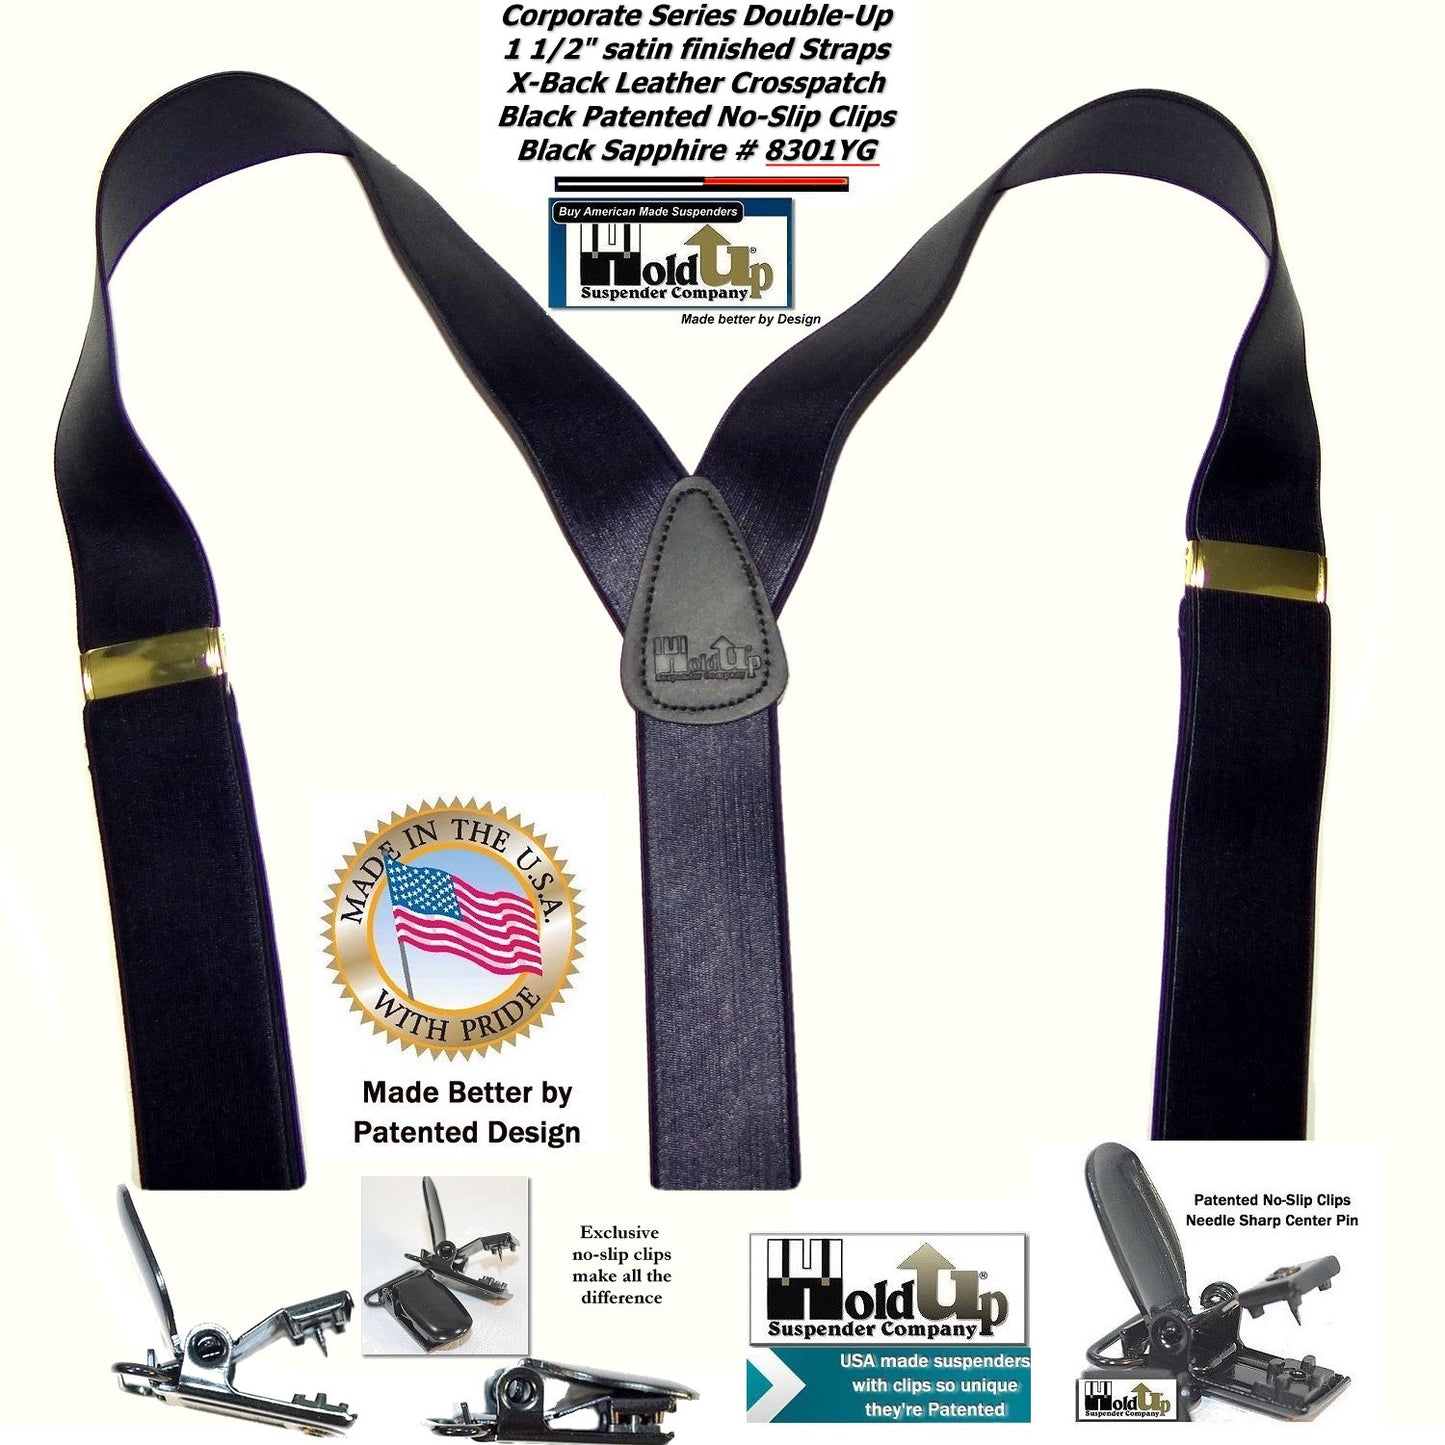 Holdup Black Sapphire 1 1/2" Wide Satin Finish Double-ups Style suspenders with Patented No-slip clips